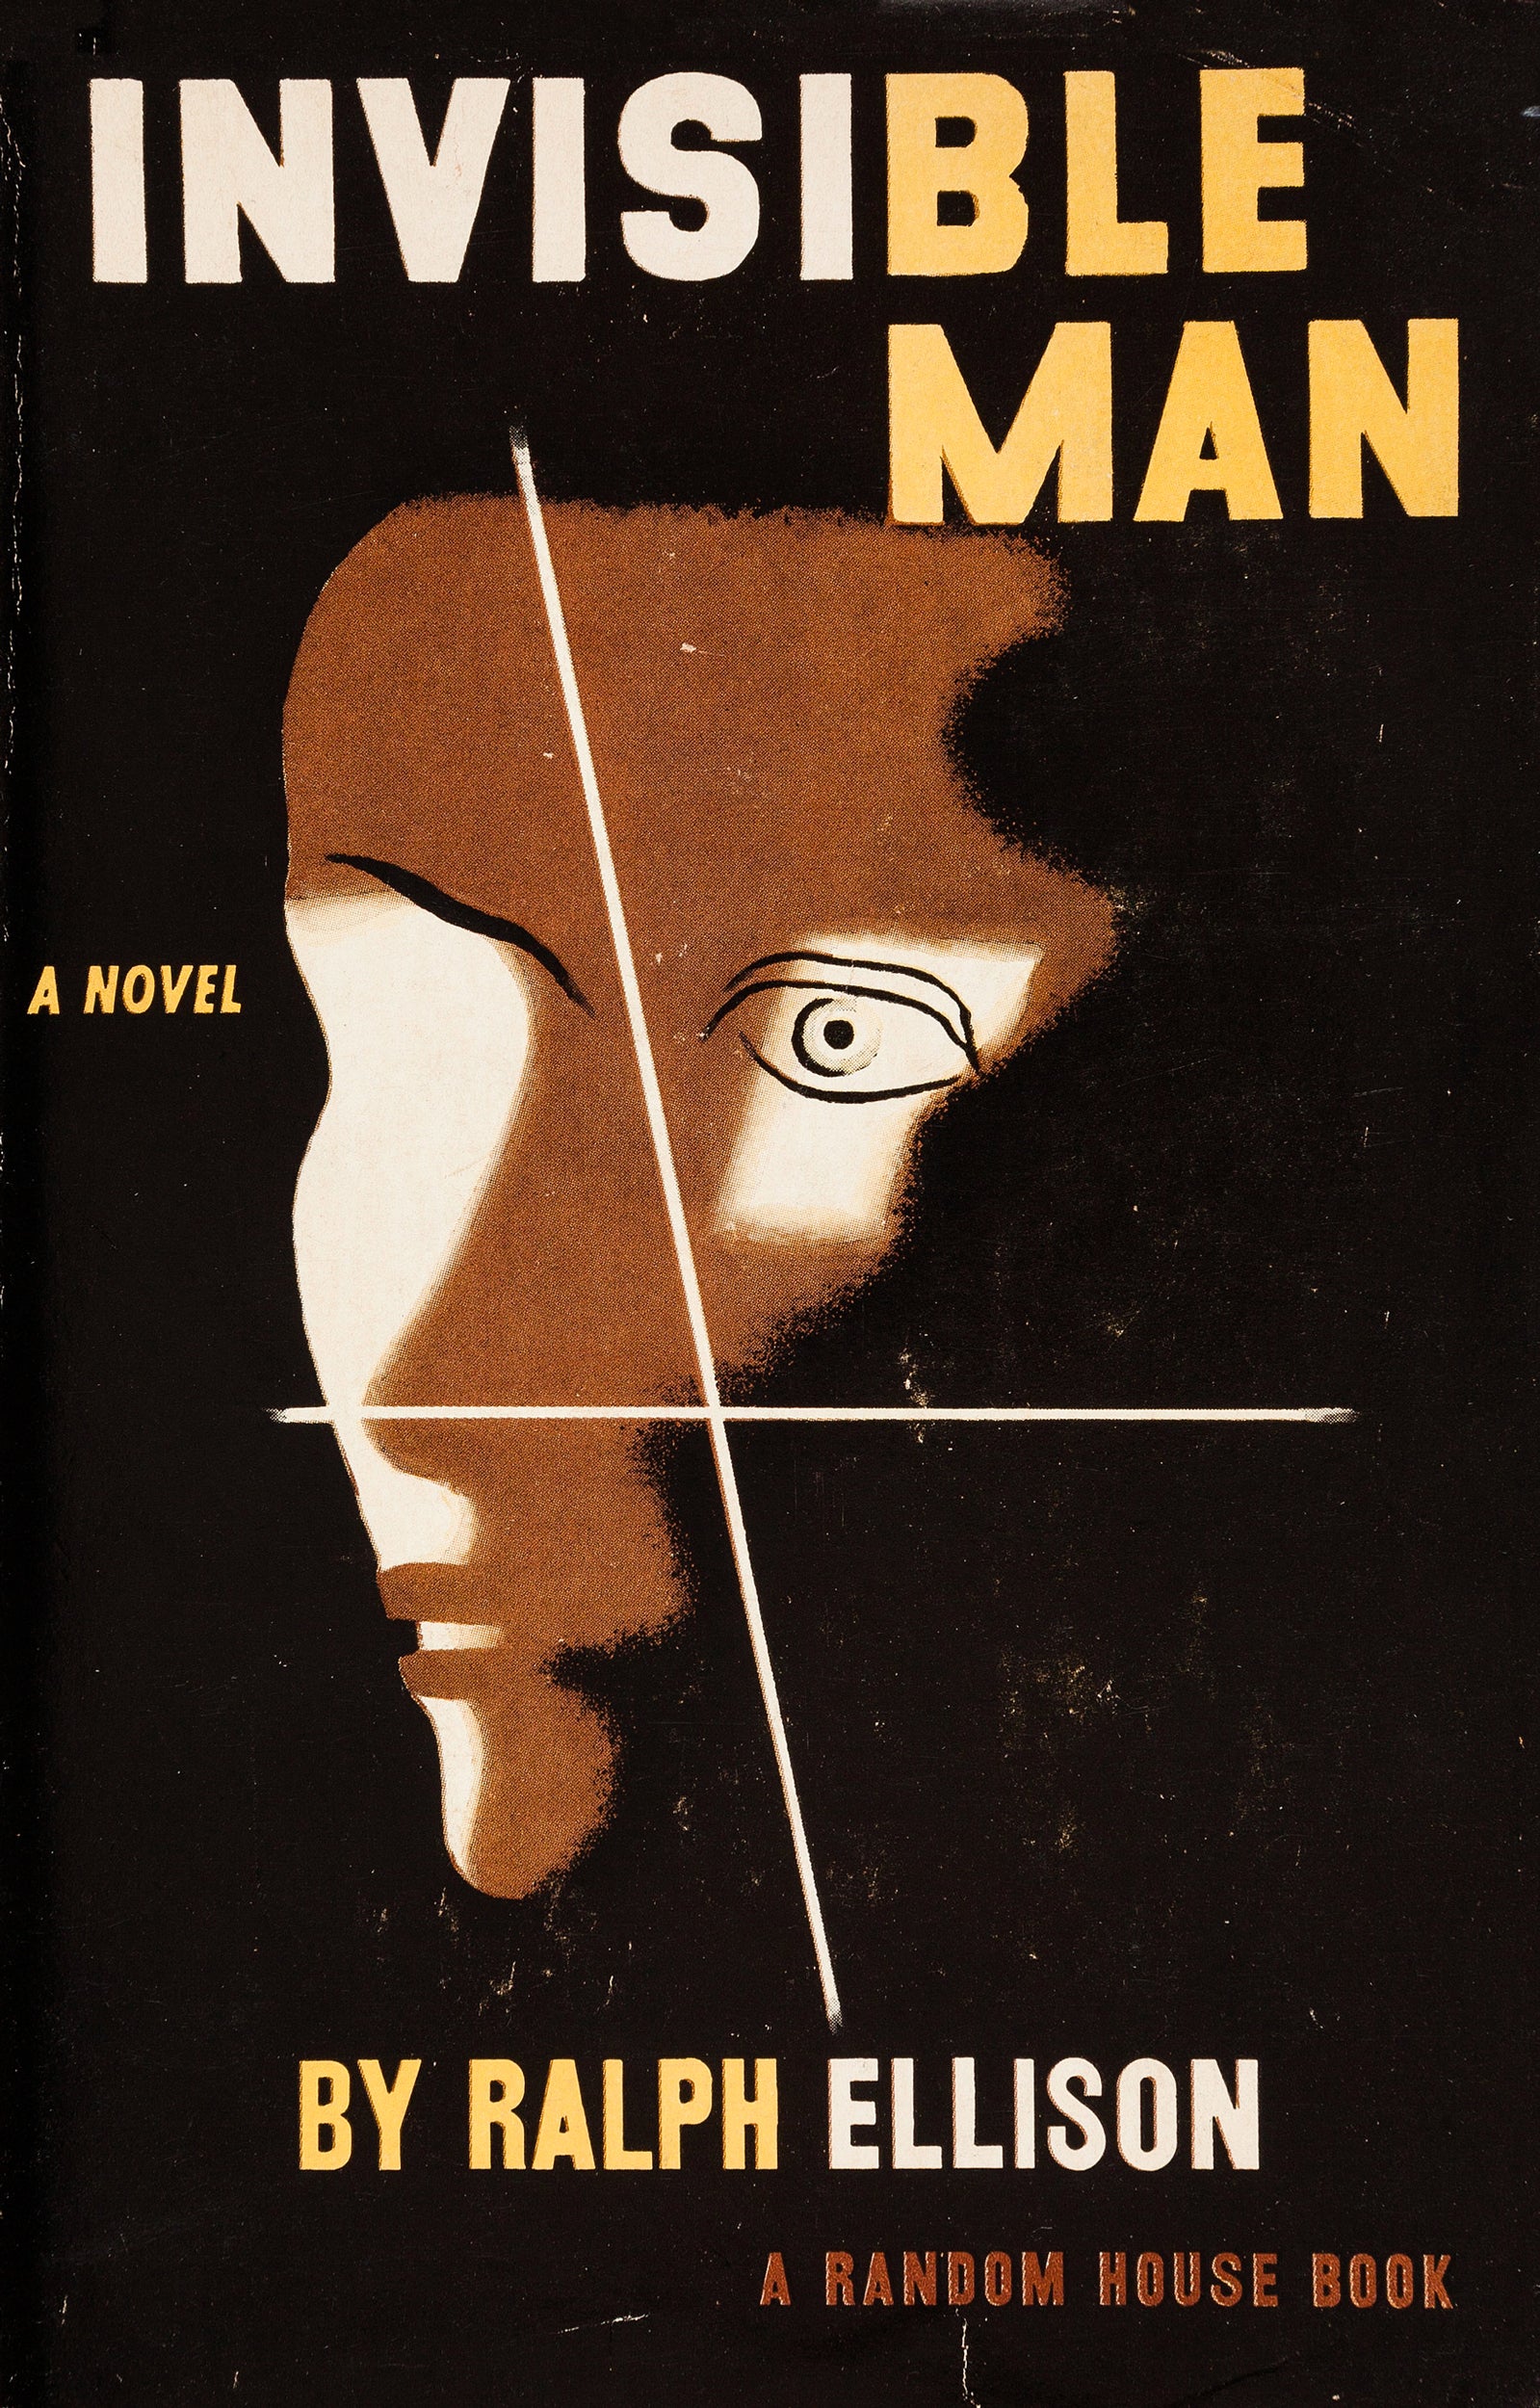 Book cover: "Invisible man."